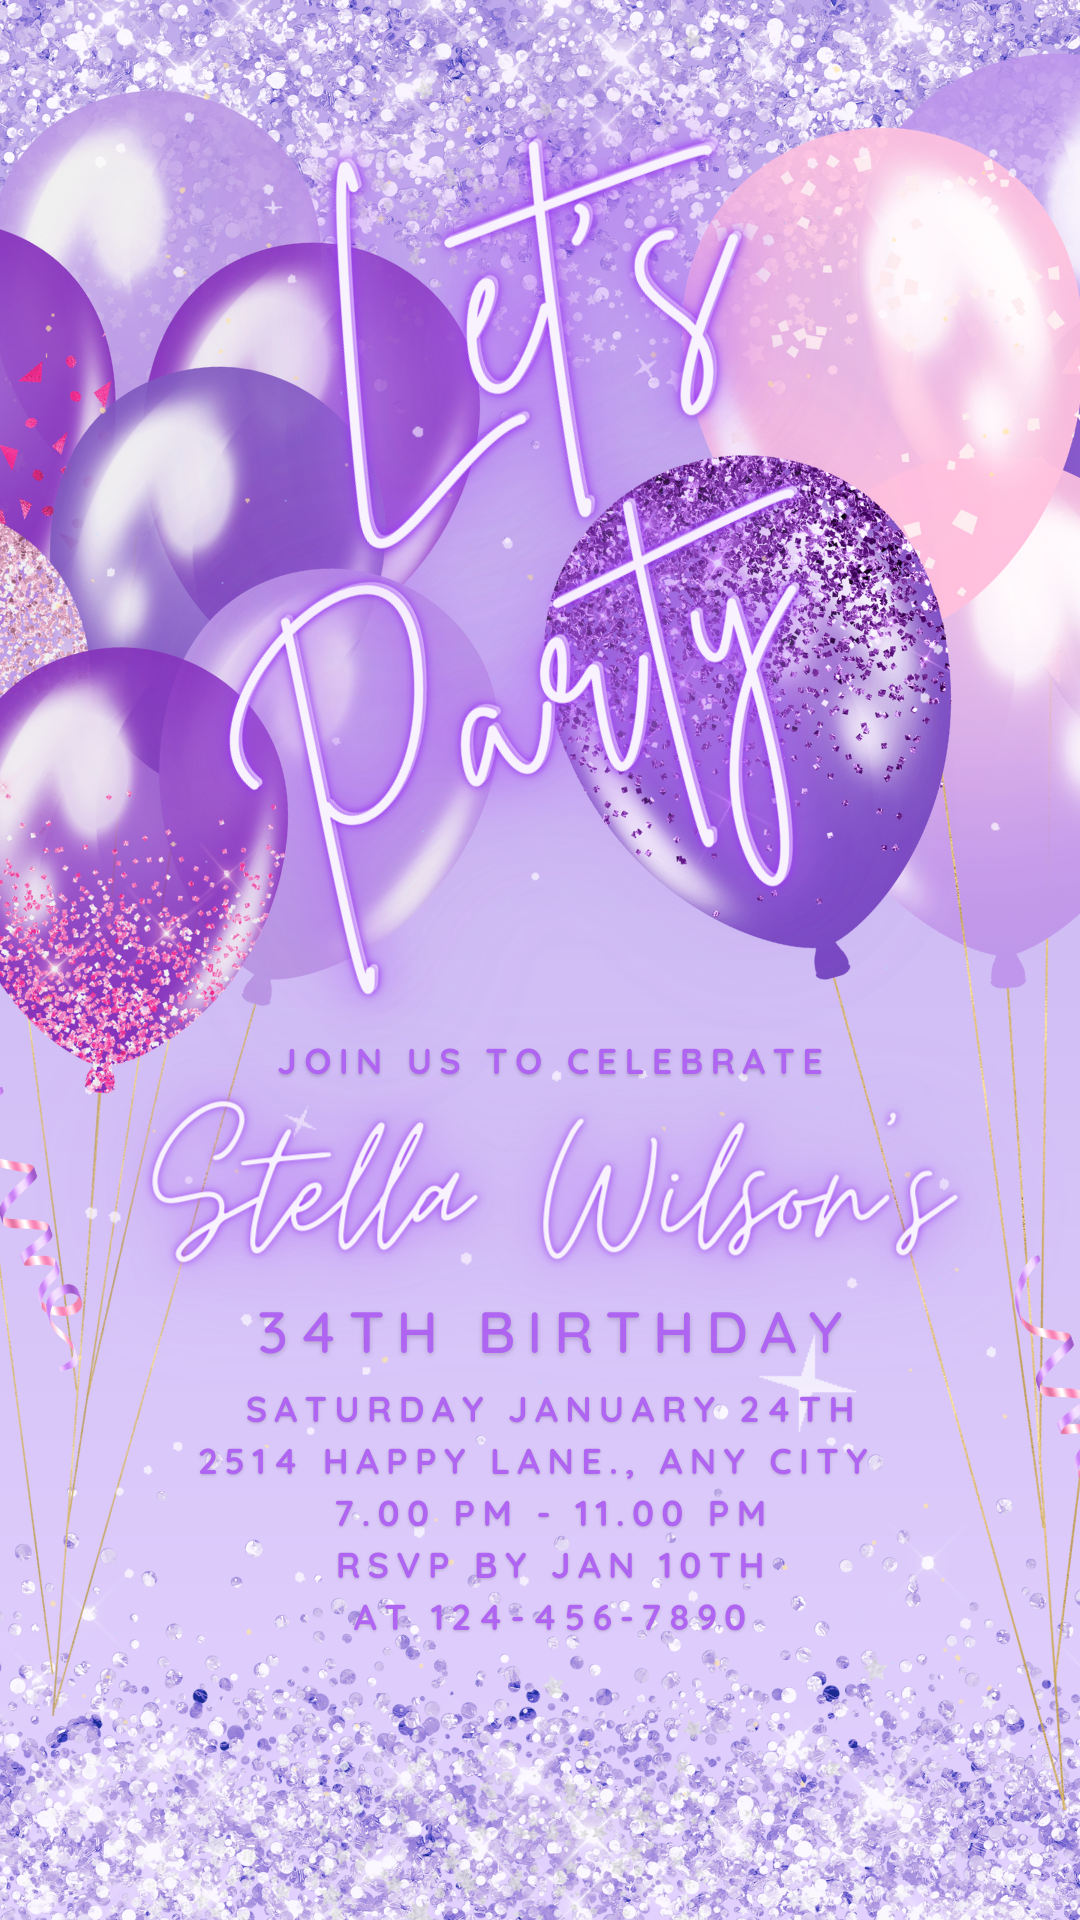 Animated Let's Party Invite for any Event Celebration, Editable Video Template, Birthday invitation for any Age | Silver & Purple E-vite